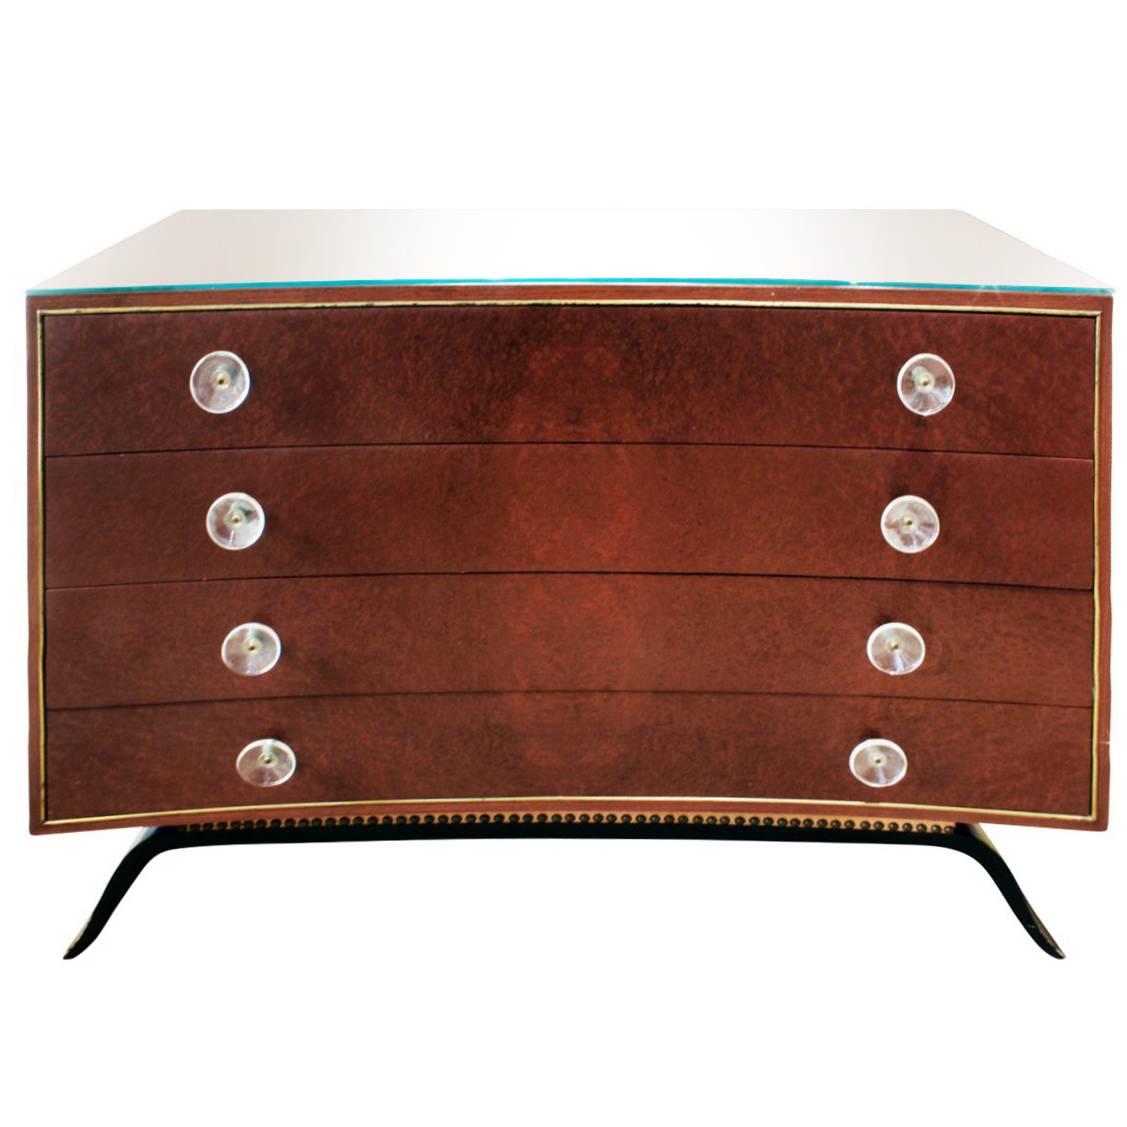 Gilbert Rohde Beautifully Crafted Chest of Drawers in India Rosewood, 1939